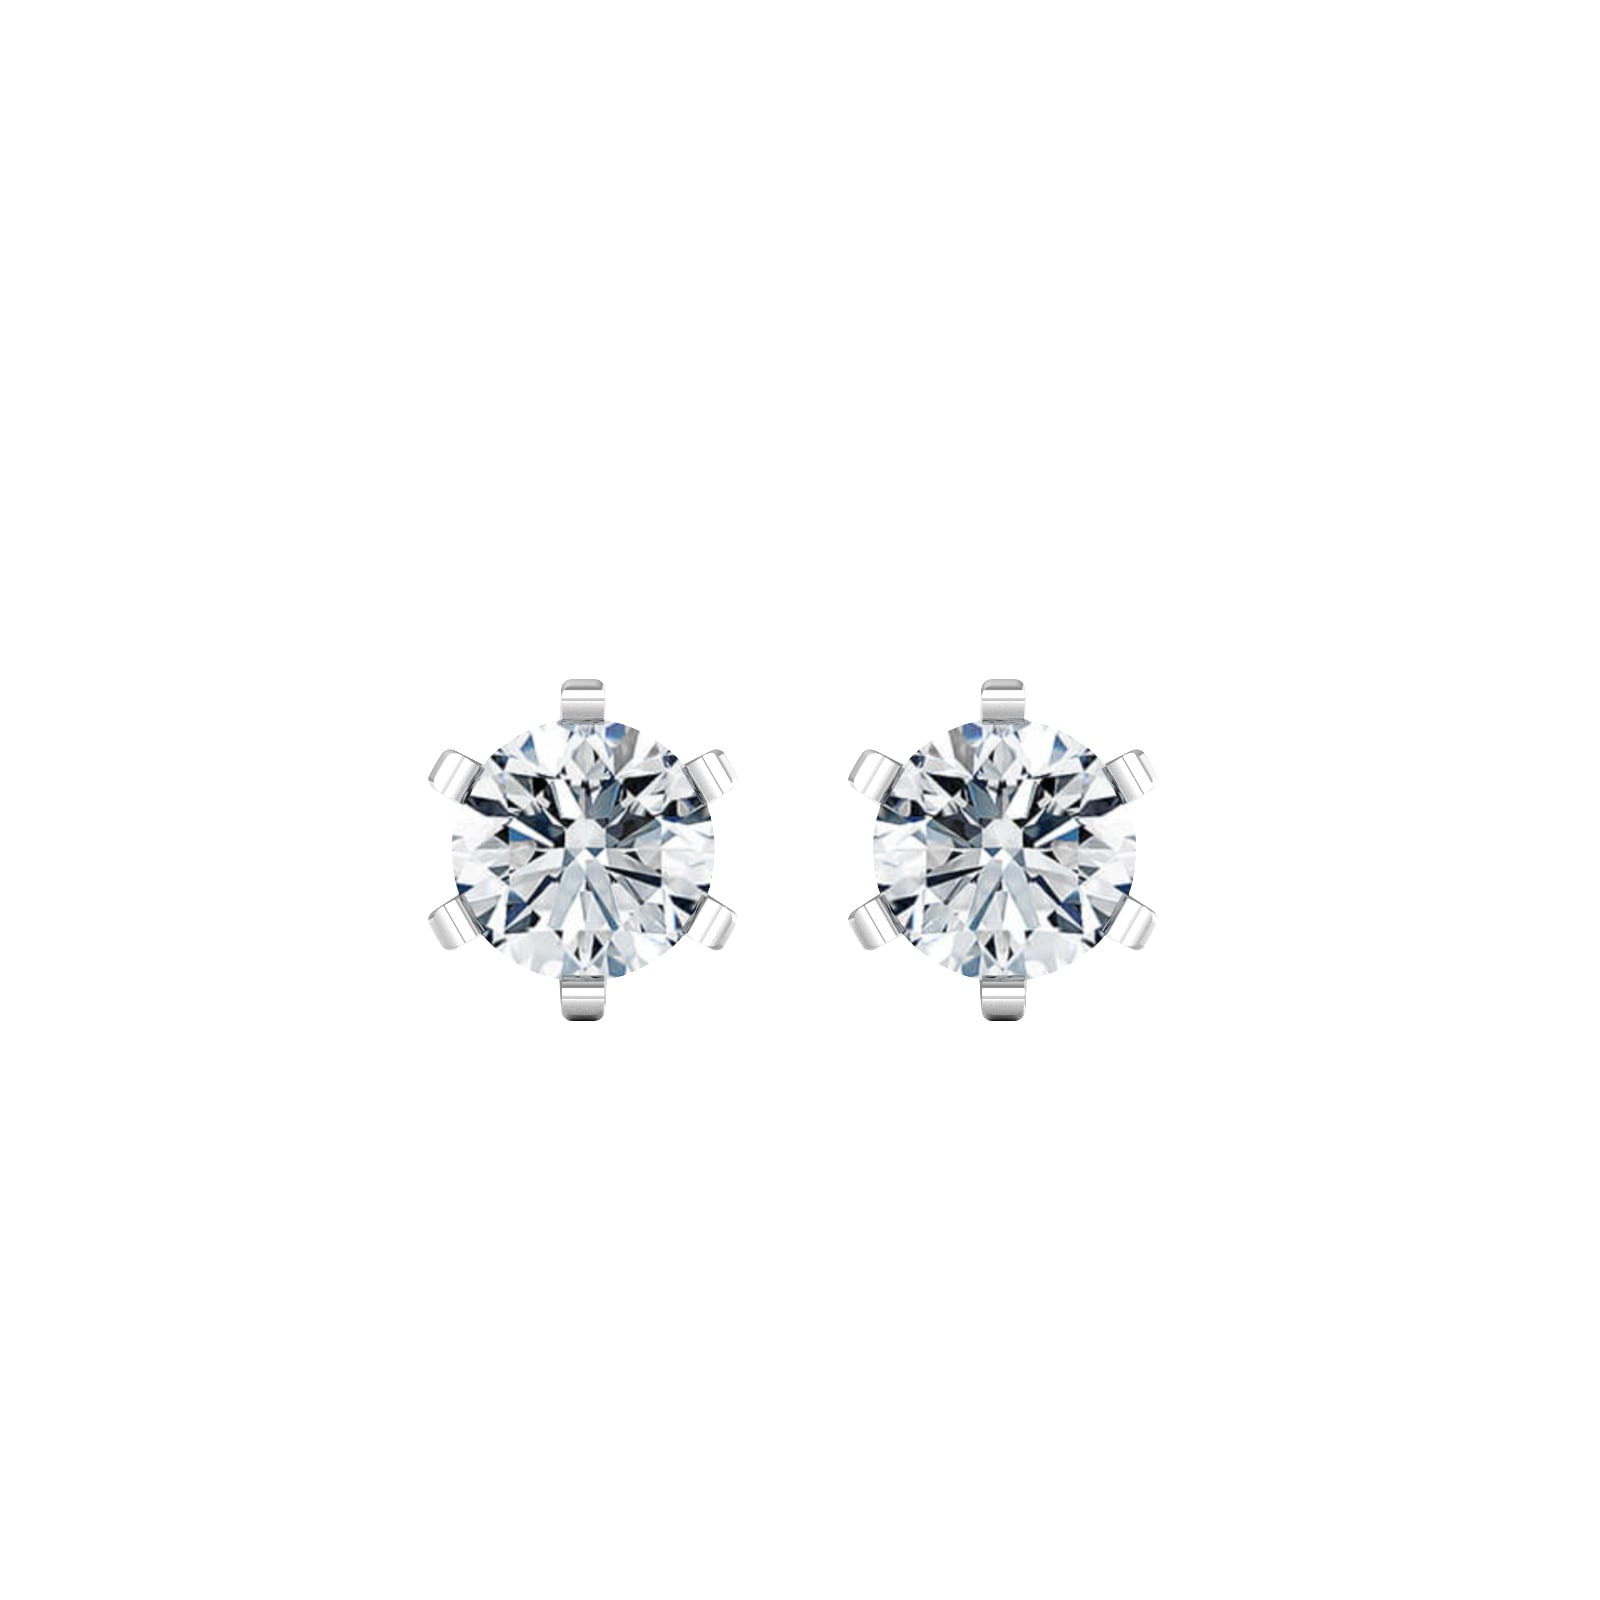 18ct White Gold 0.40cttw Solitaire Diamond Stud Earrings